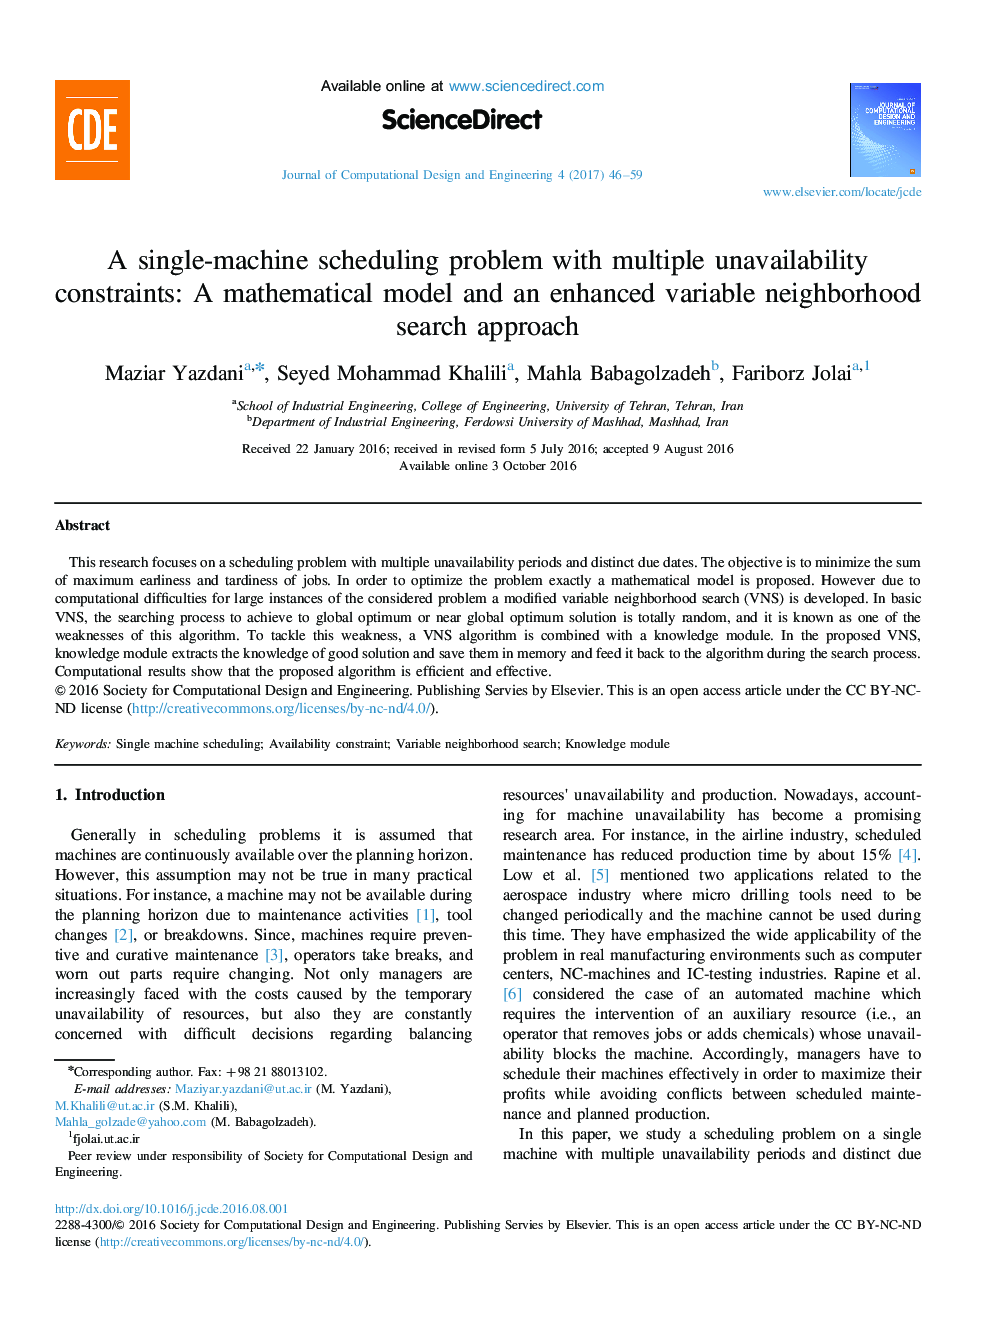 A single-machine scheduling problem with multiple unavailability constraints: A mathematical model and an enhanced variable neighborhood search approach